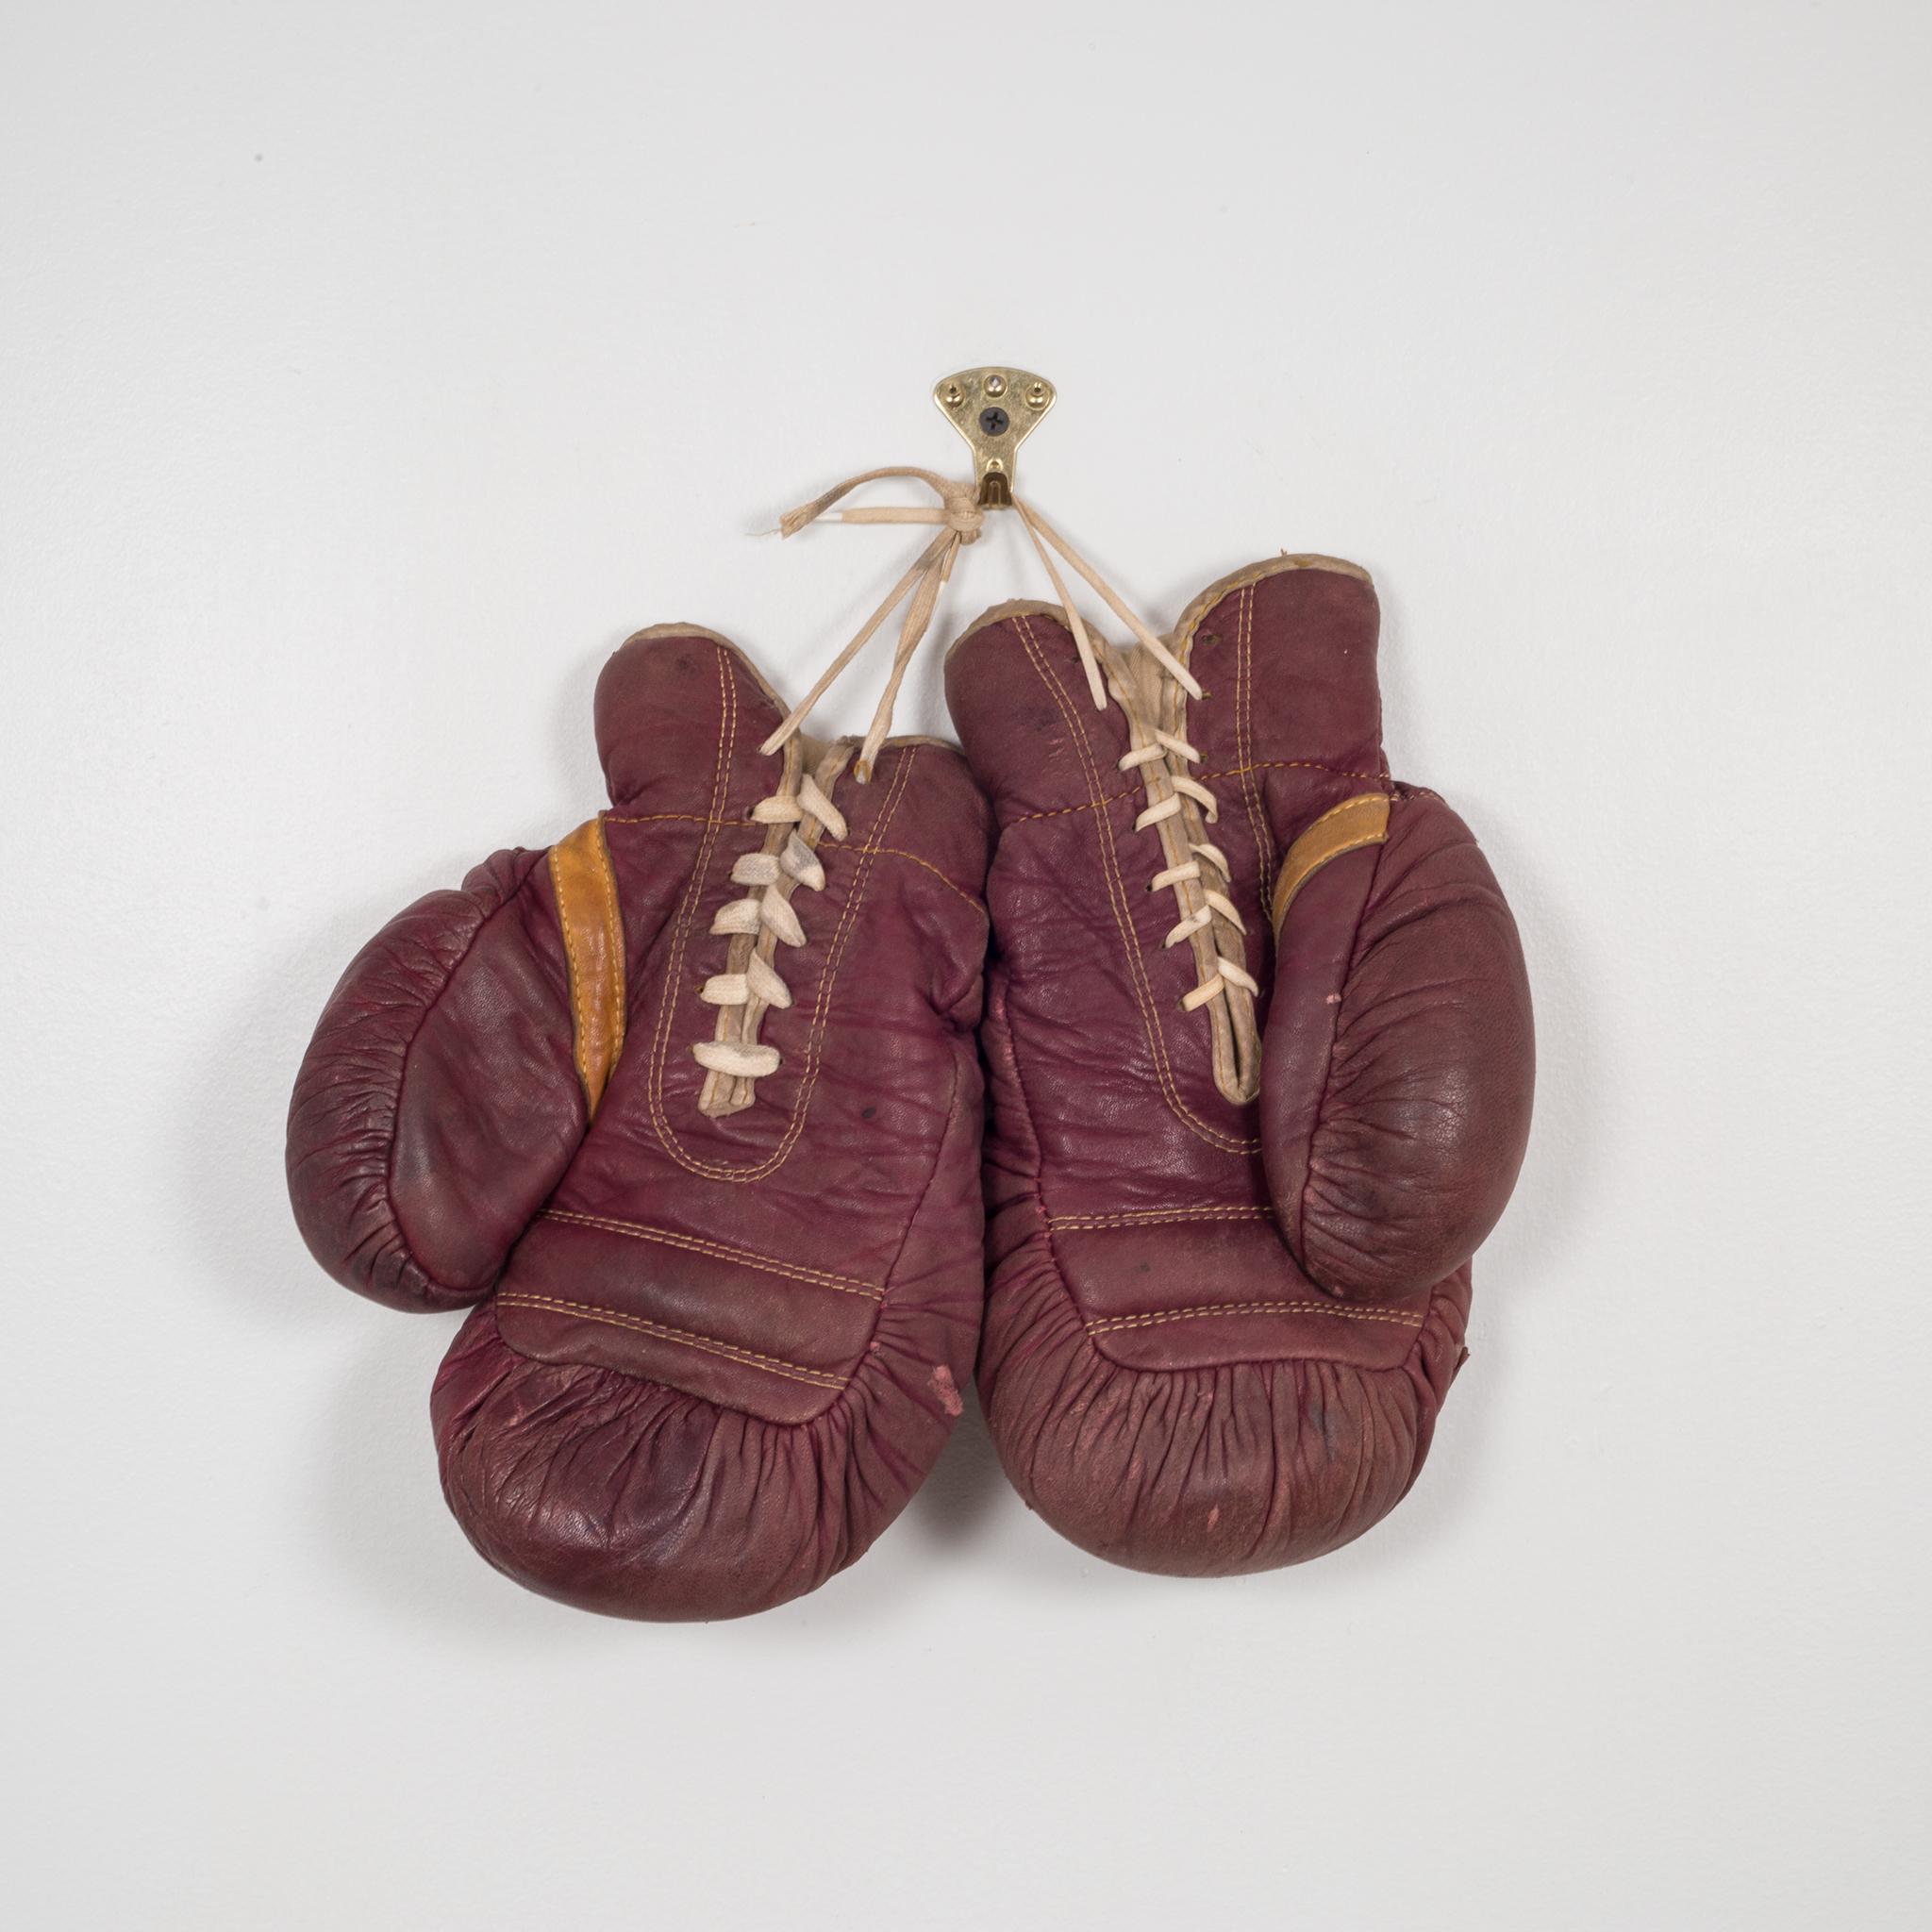 About

This is a original pair of vintage boxing gloves. The gloves are a maroon leather and and tan leather on the palm with white laces. The are both marked 